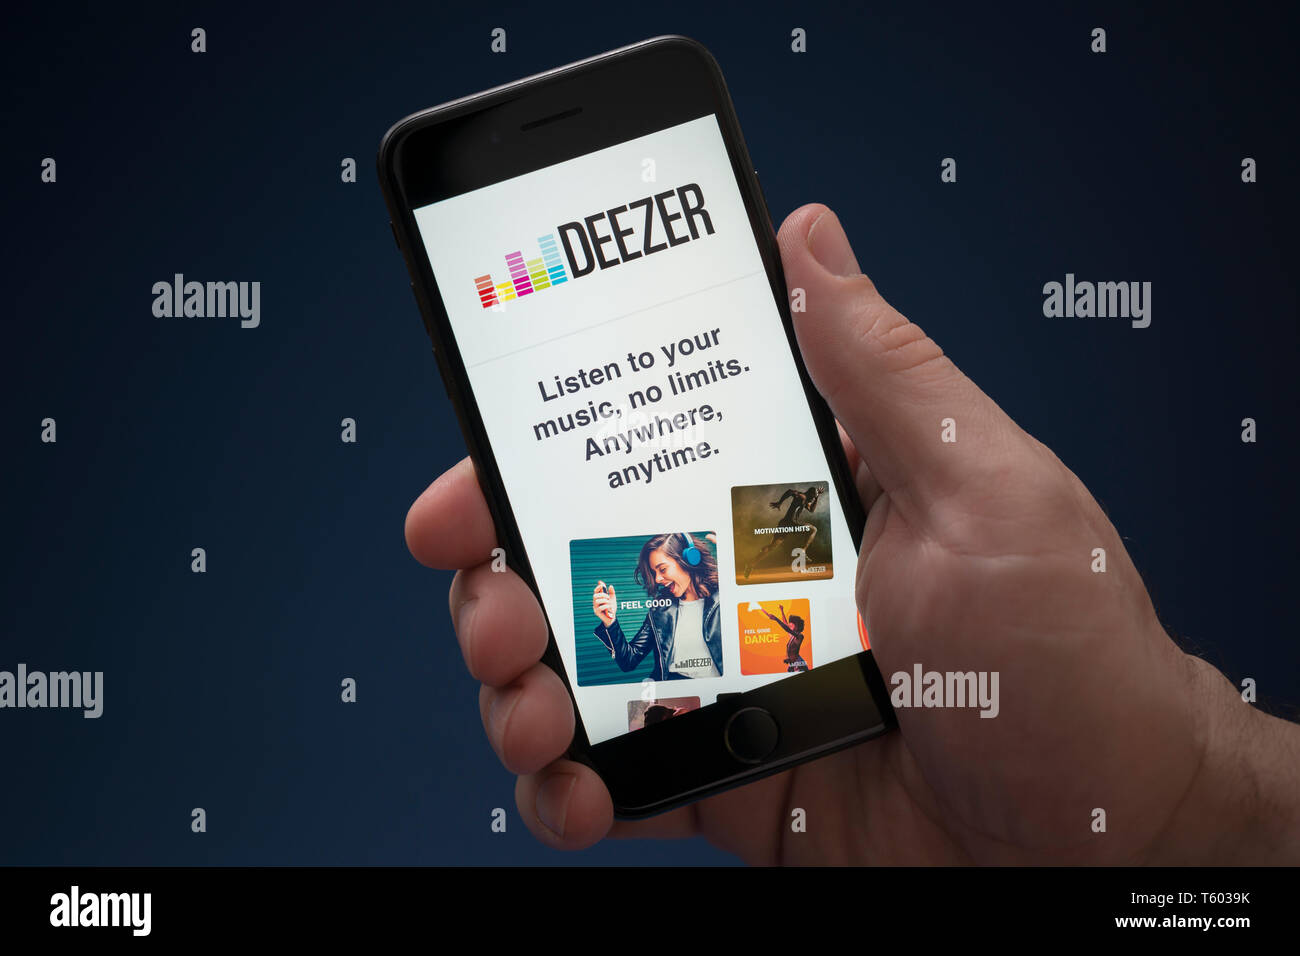 A man looks at his iPhone which displays the Deezer logo (Editorial use only). Stock Photo